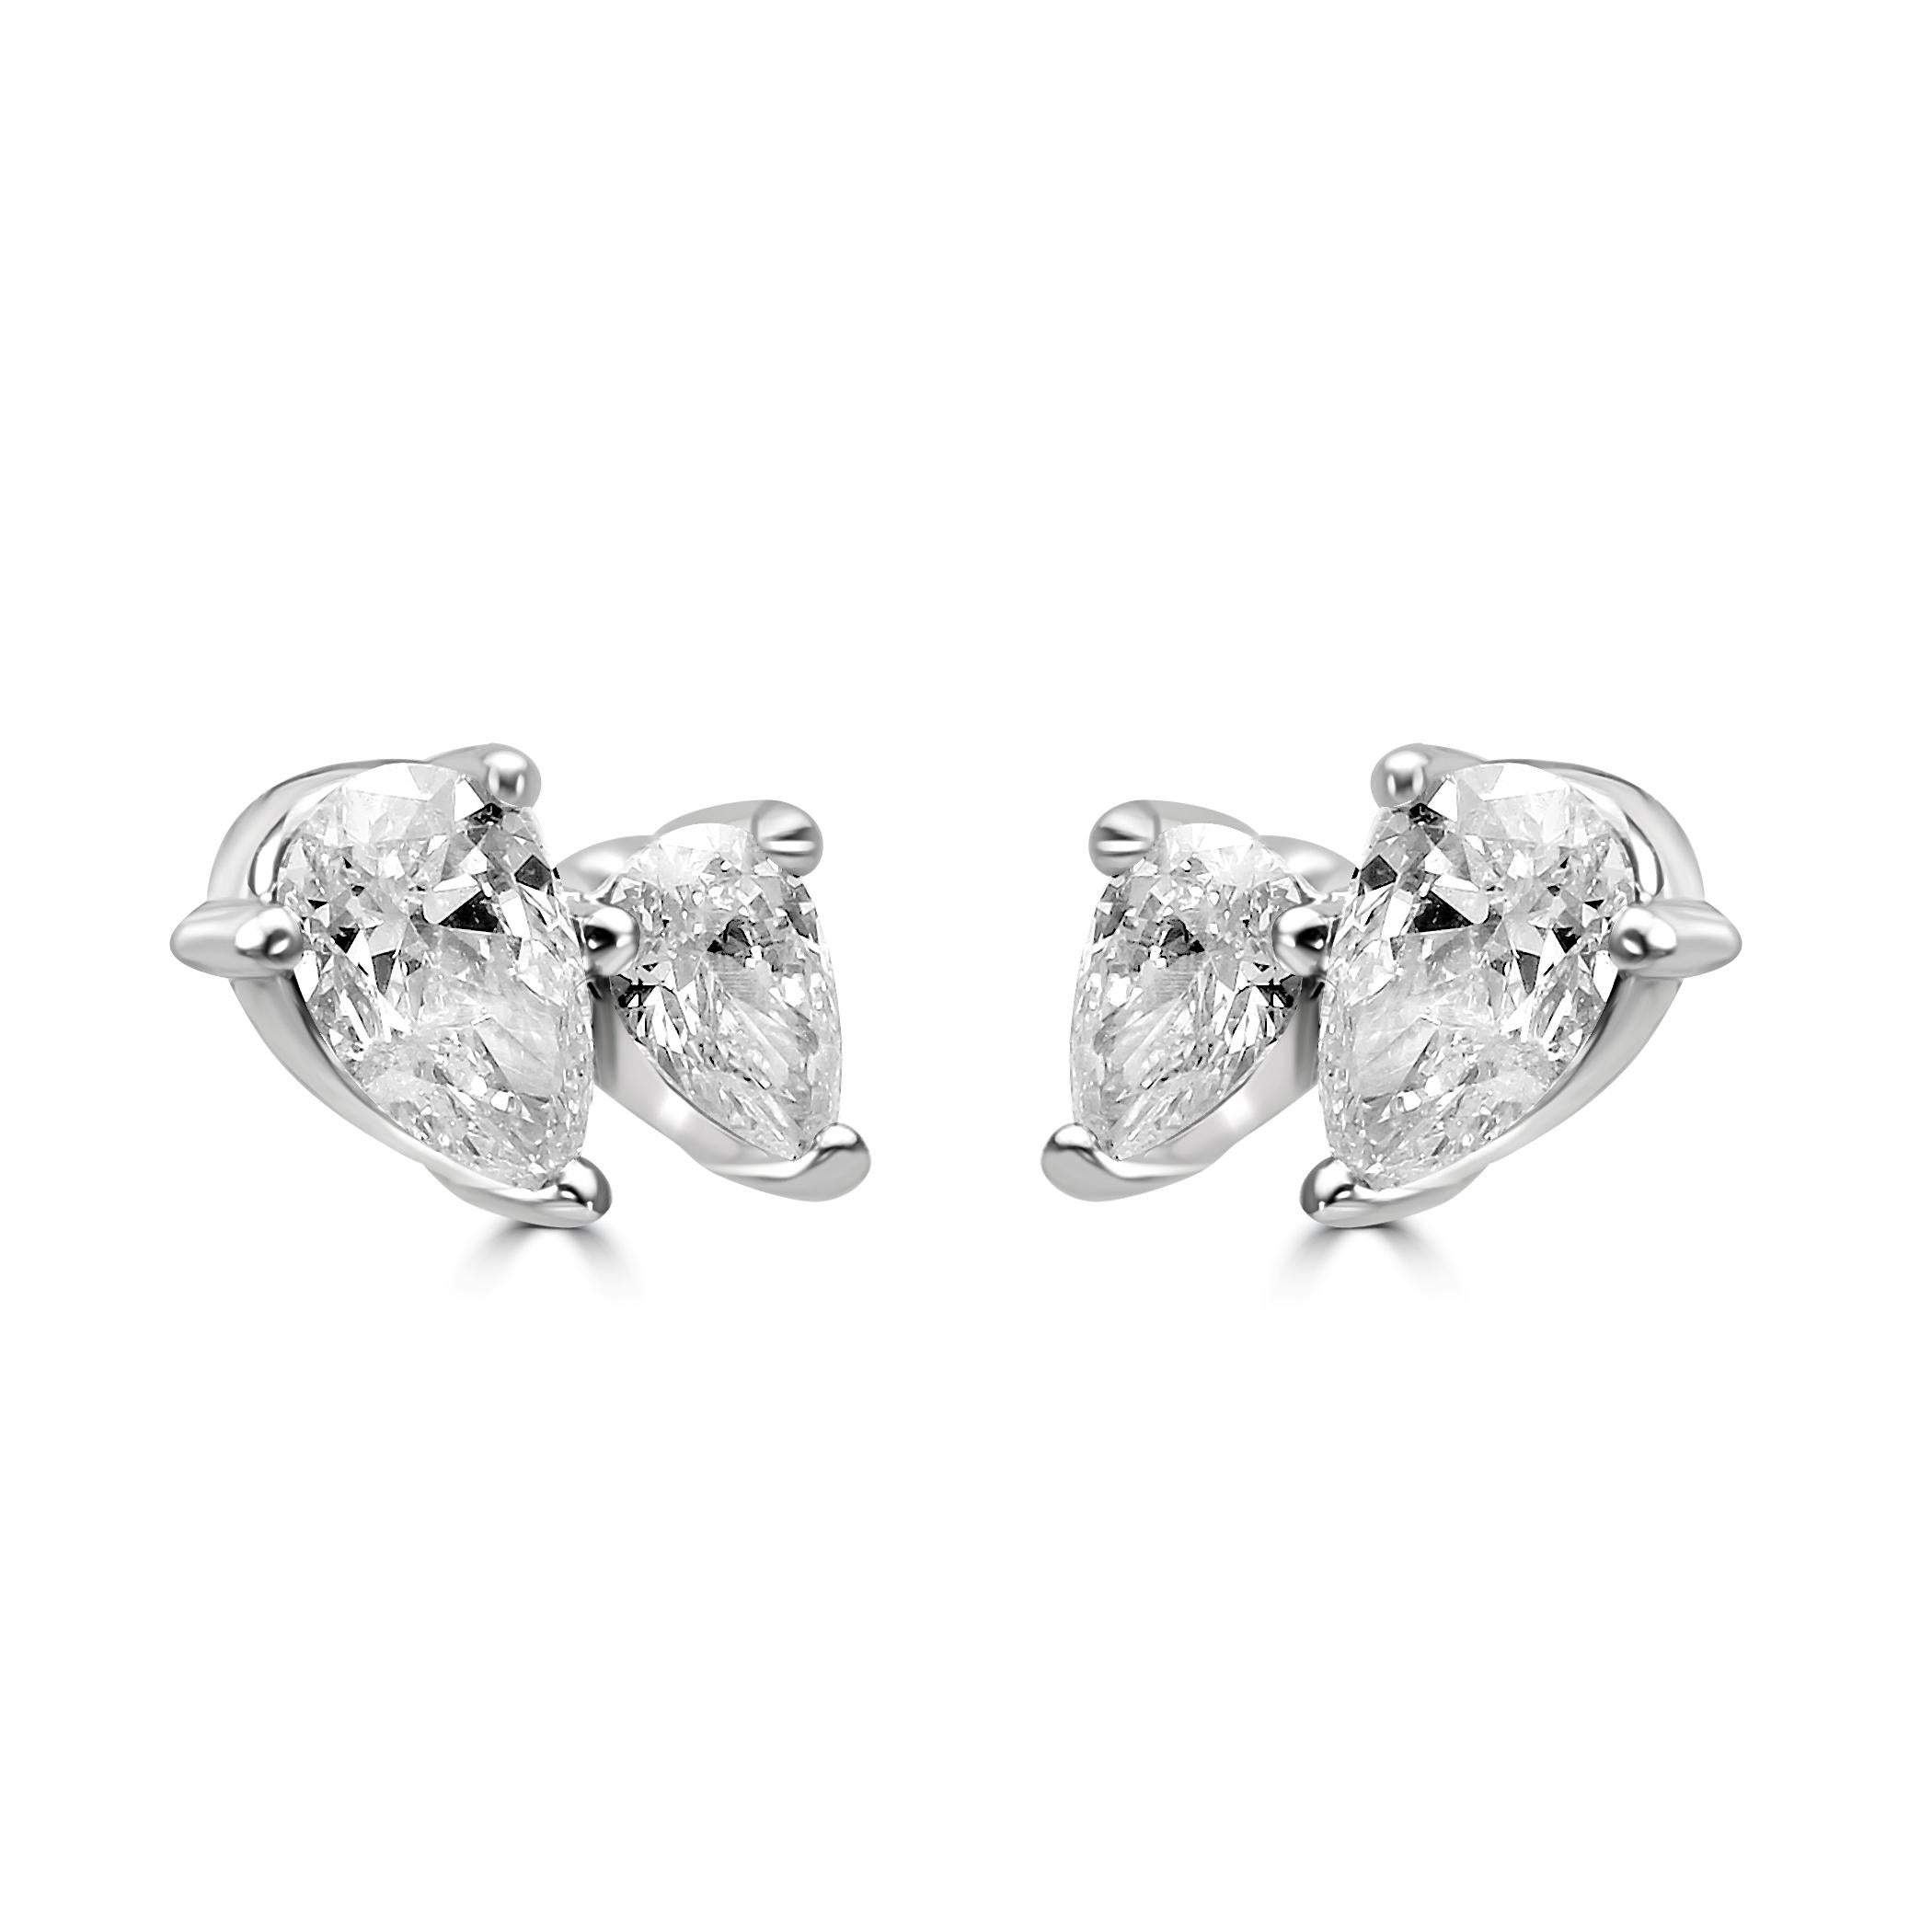 The star of these earrings are the exquisite Pear-Shaped White Diamond, a classic and graceful choice that exudes timeless beauty. The 